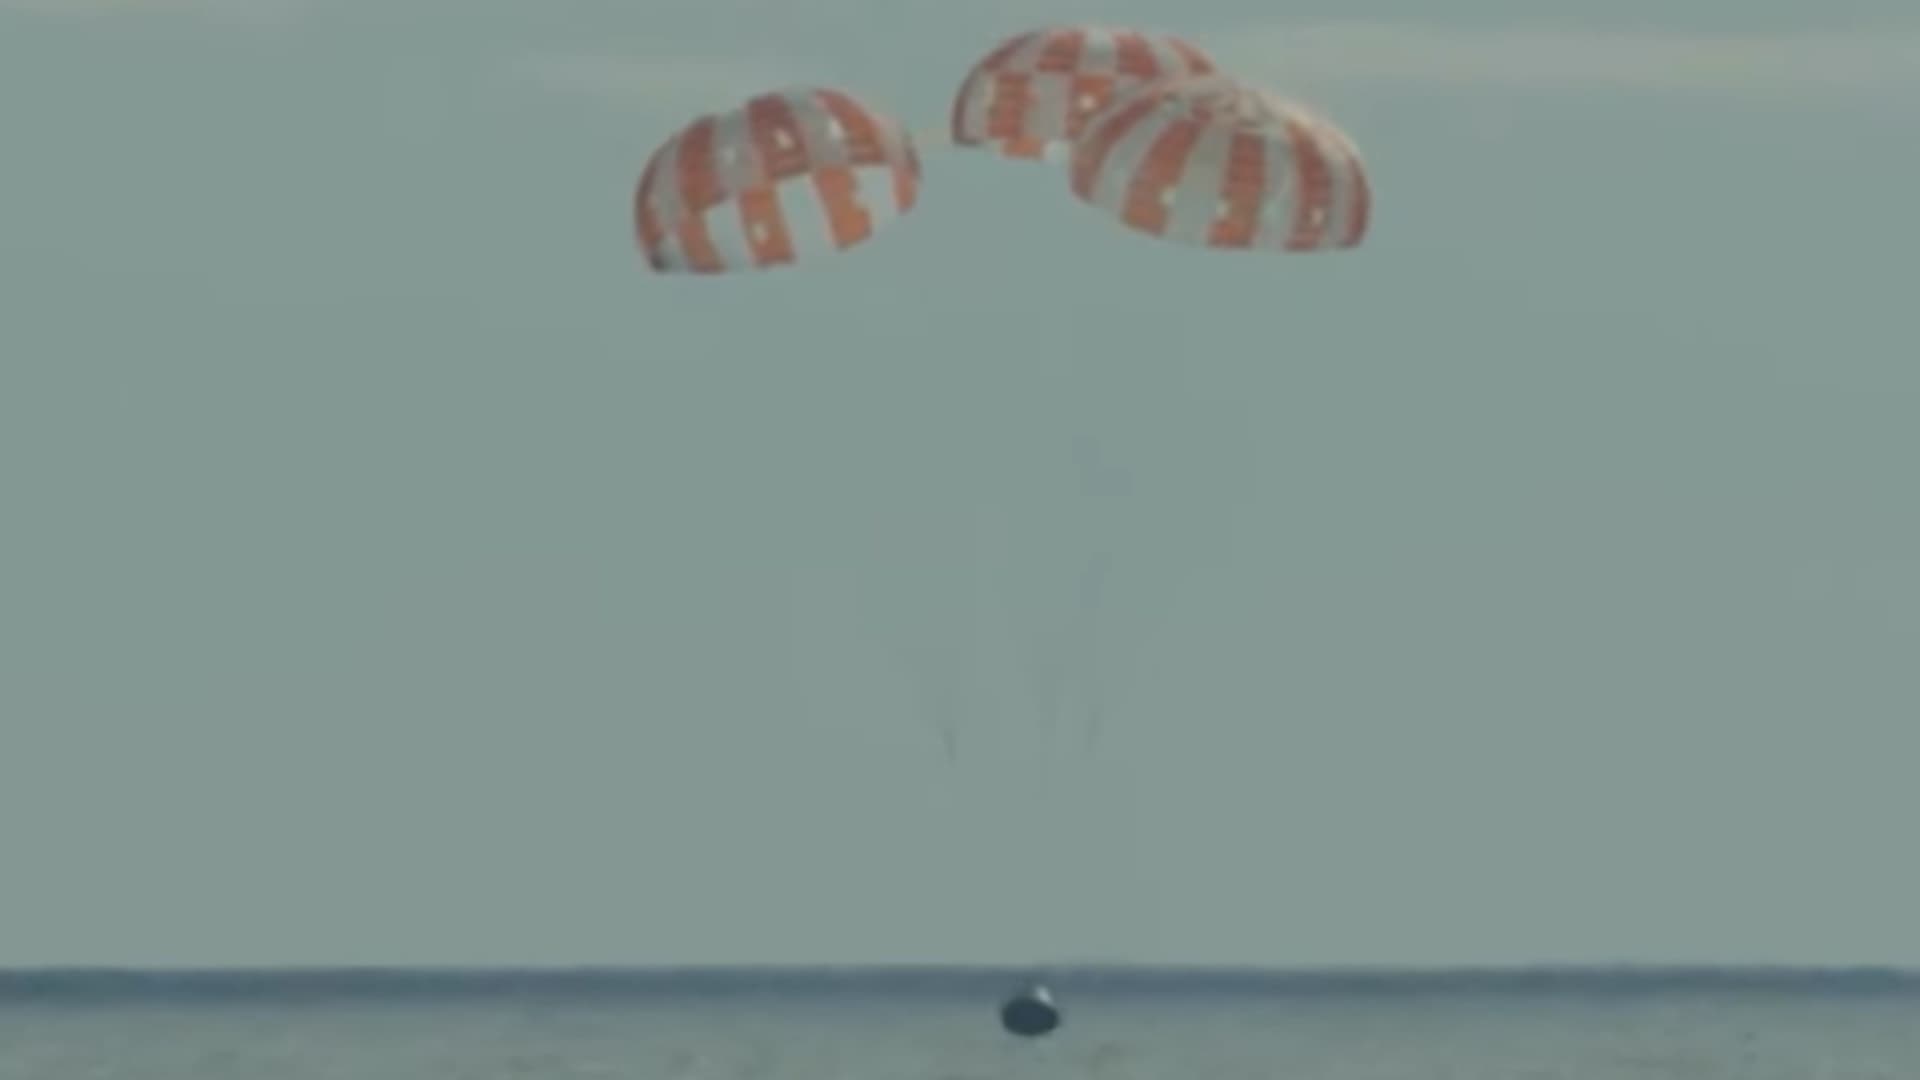 The Orion capsule splashes down in the Pacific Ocean on December 11, 2022.